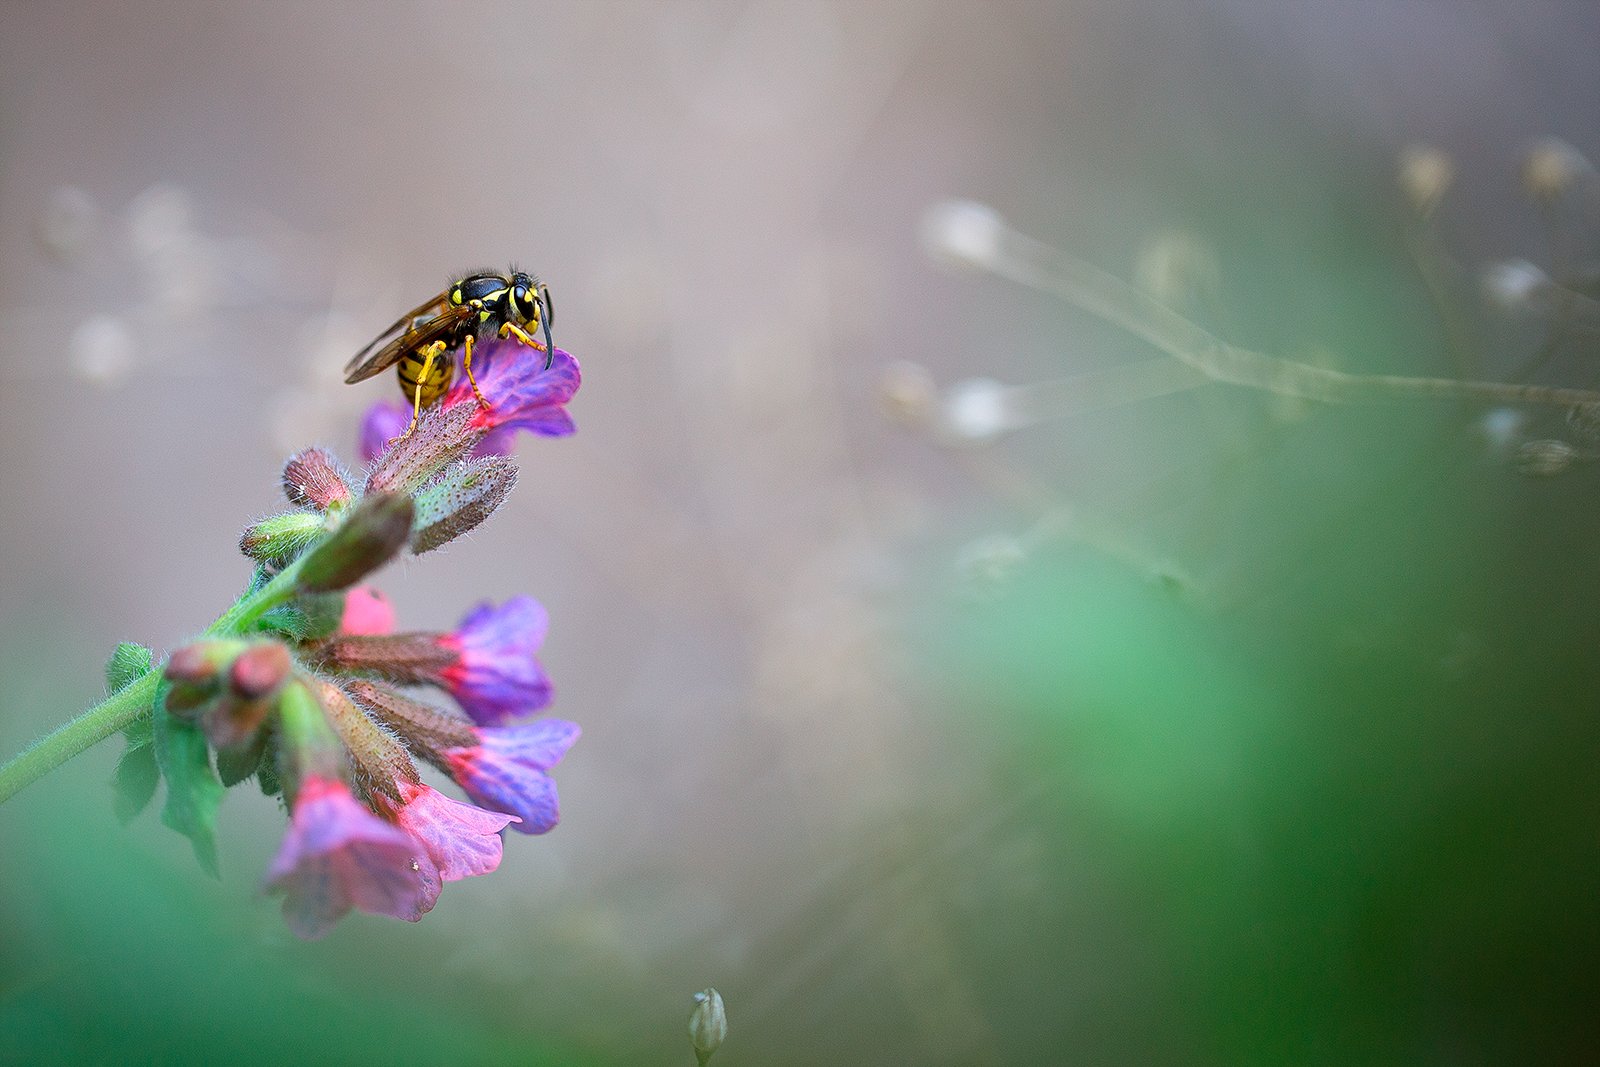 insects,wasp,macro,beautiful,insect,wild,wildlife,nature,faerie,close up,, Georgi Georgiev